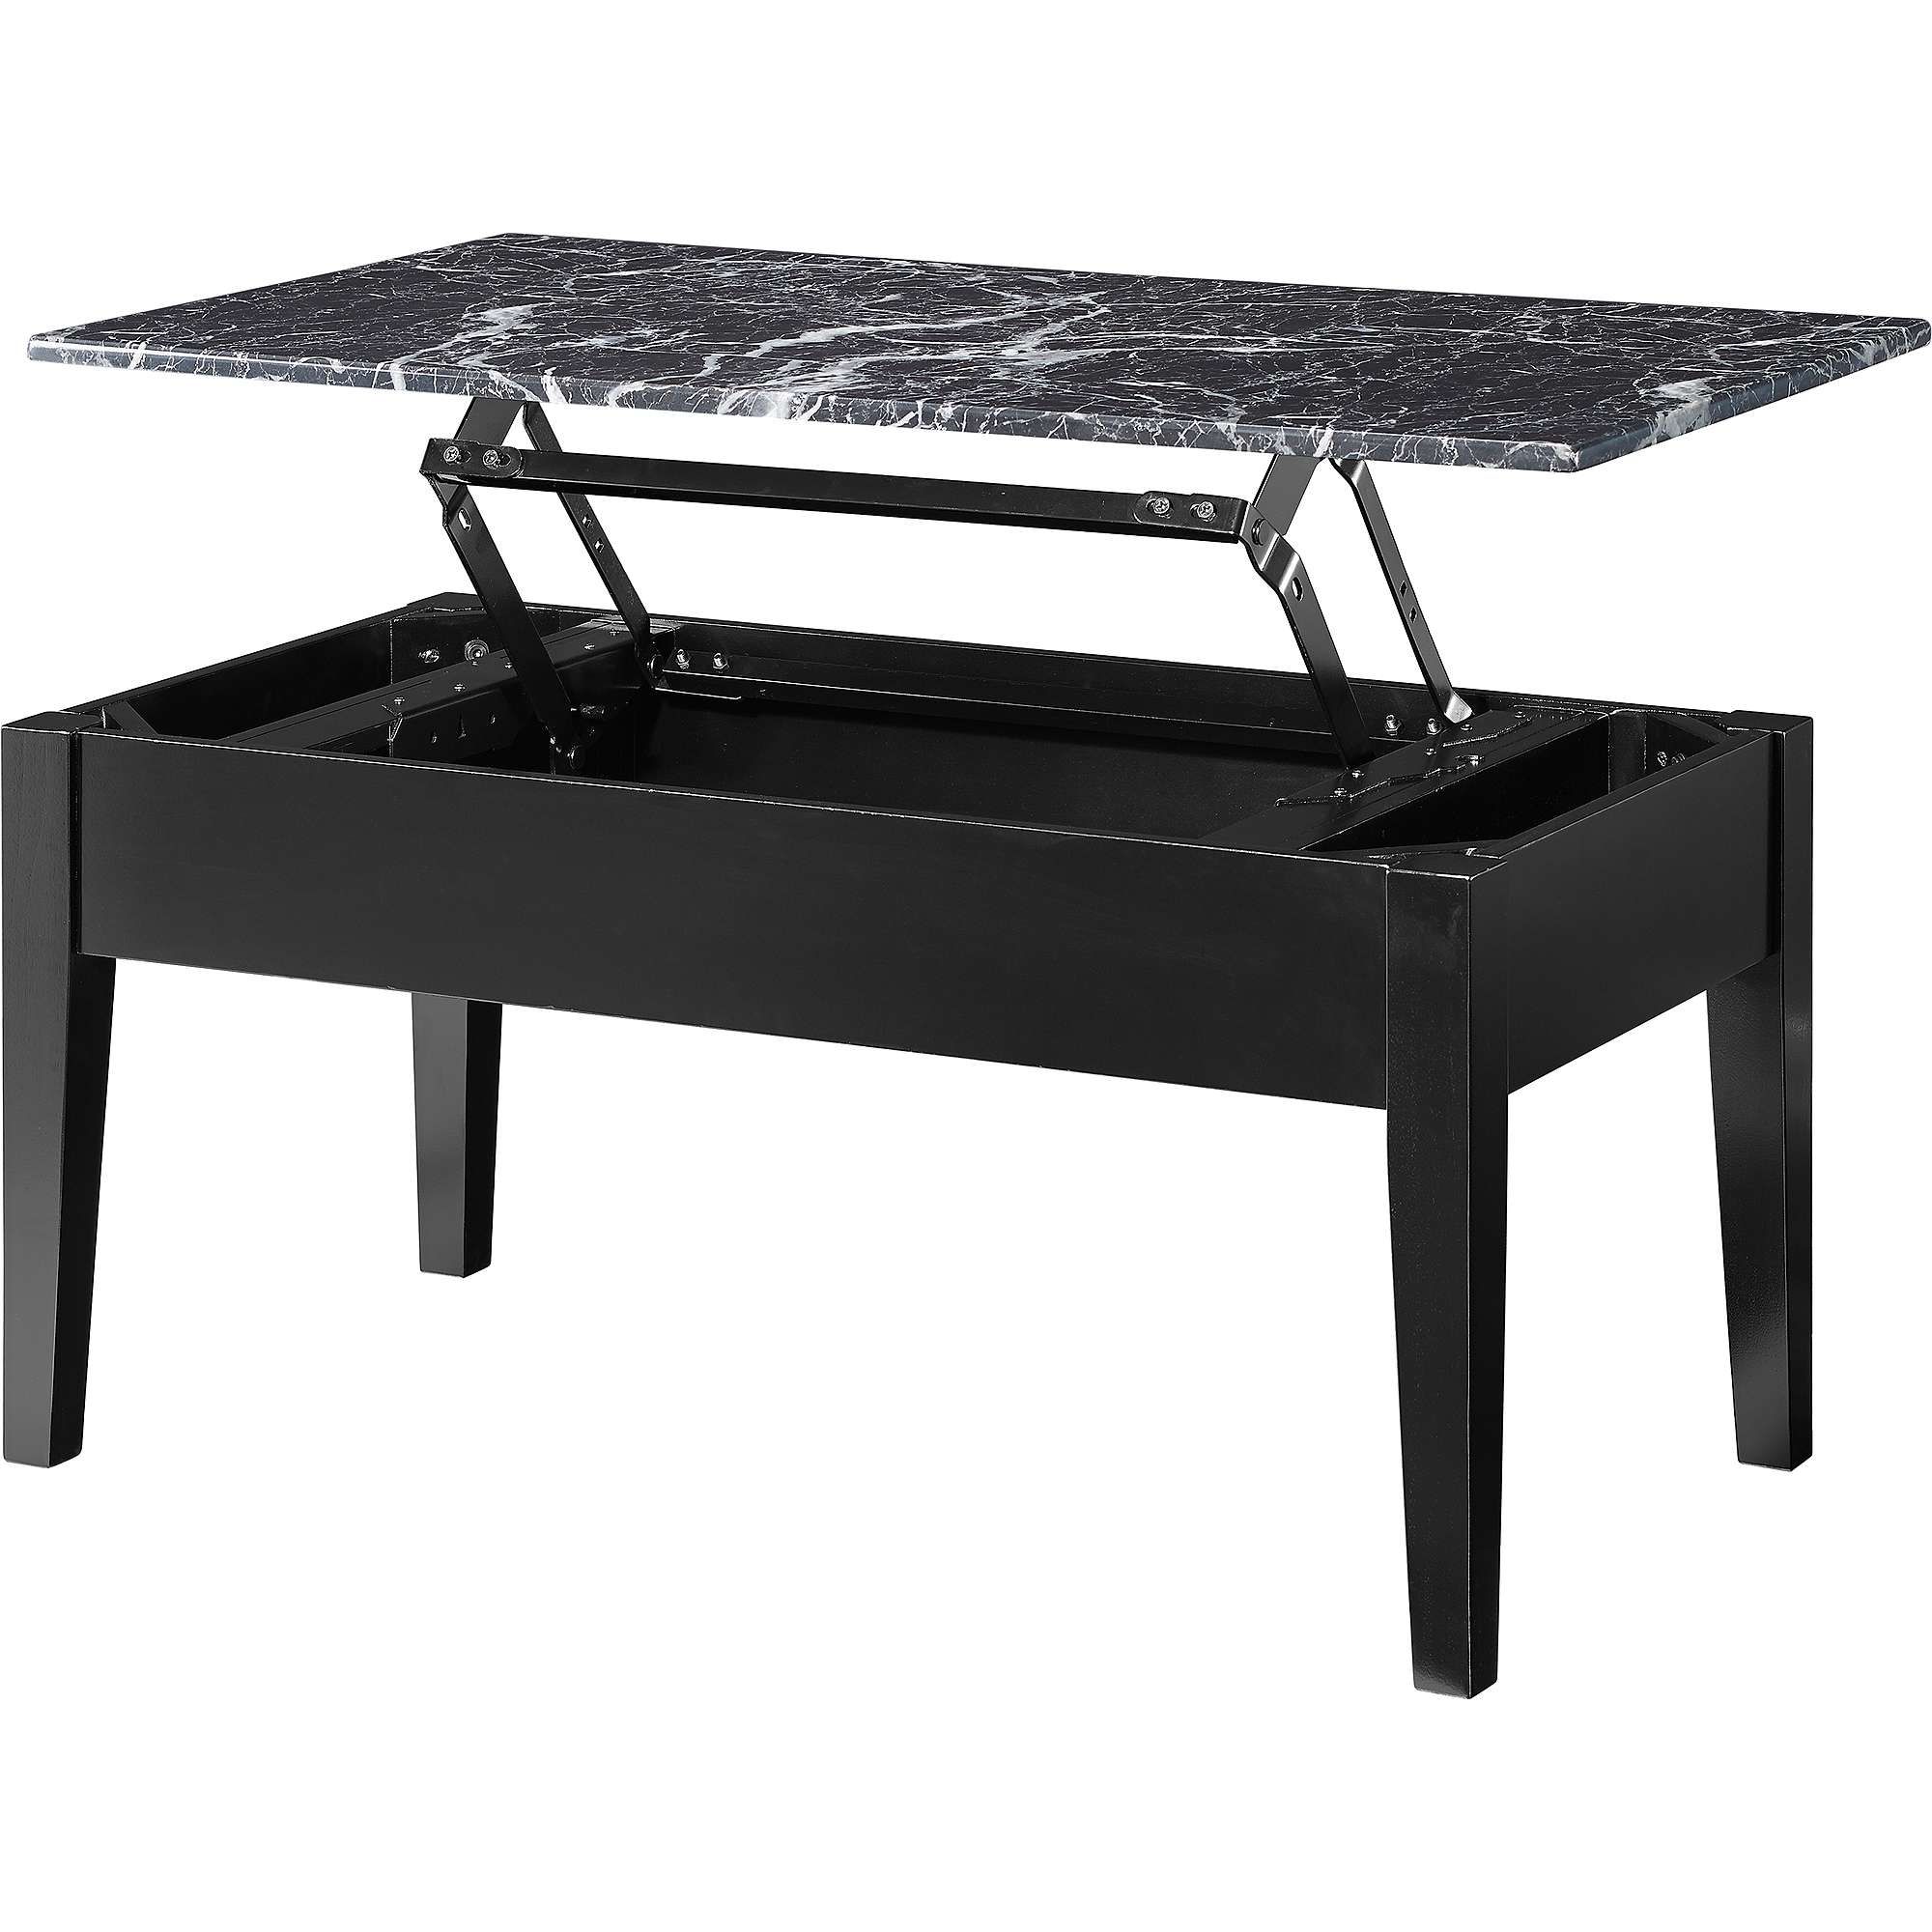 Most Popular Coffee Table With Raised Top With Dorel Living Faux Marble Lift Top Coffee Table – Walmart (View 17 of 20)